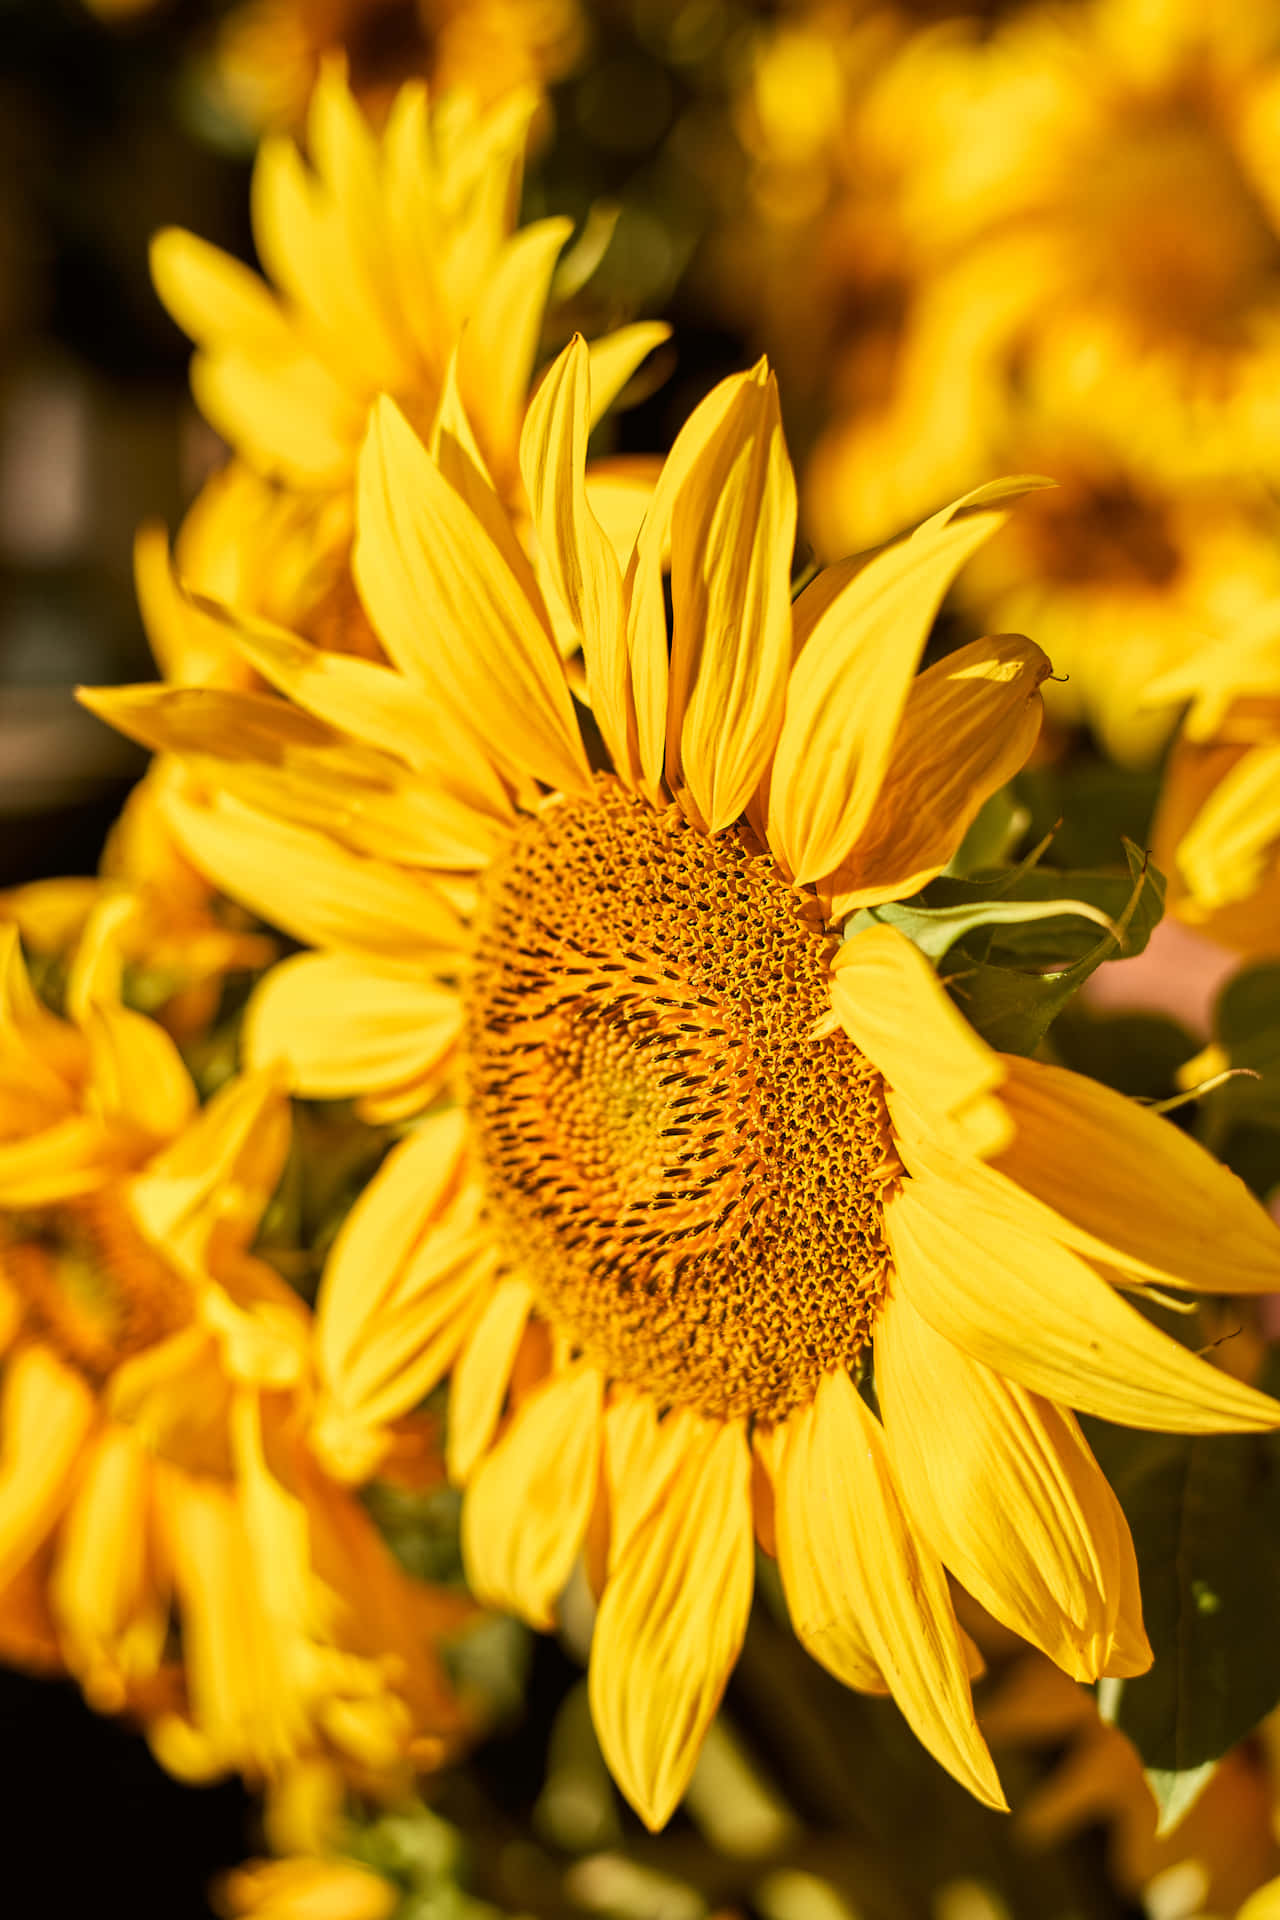 Get Ready for Spring with Bright&Colorful Sunflower Aesthetics for Your iPhone Wallpaper